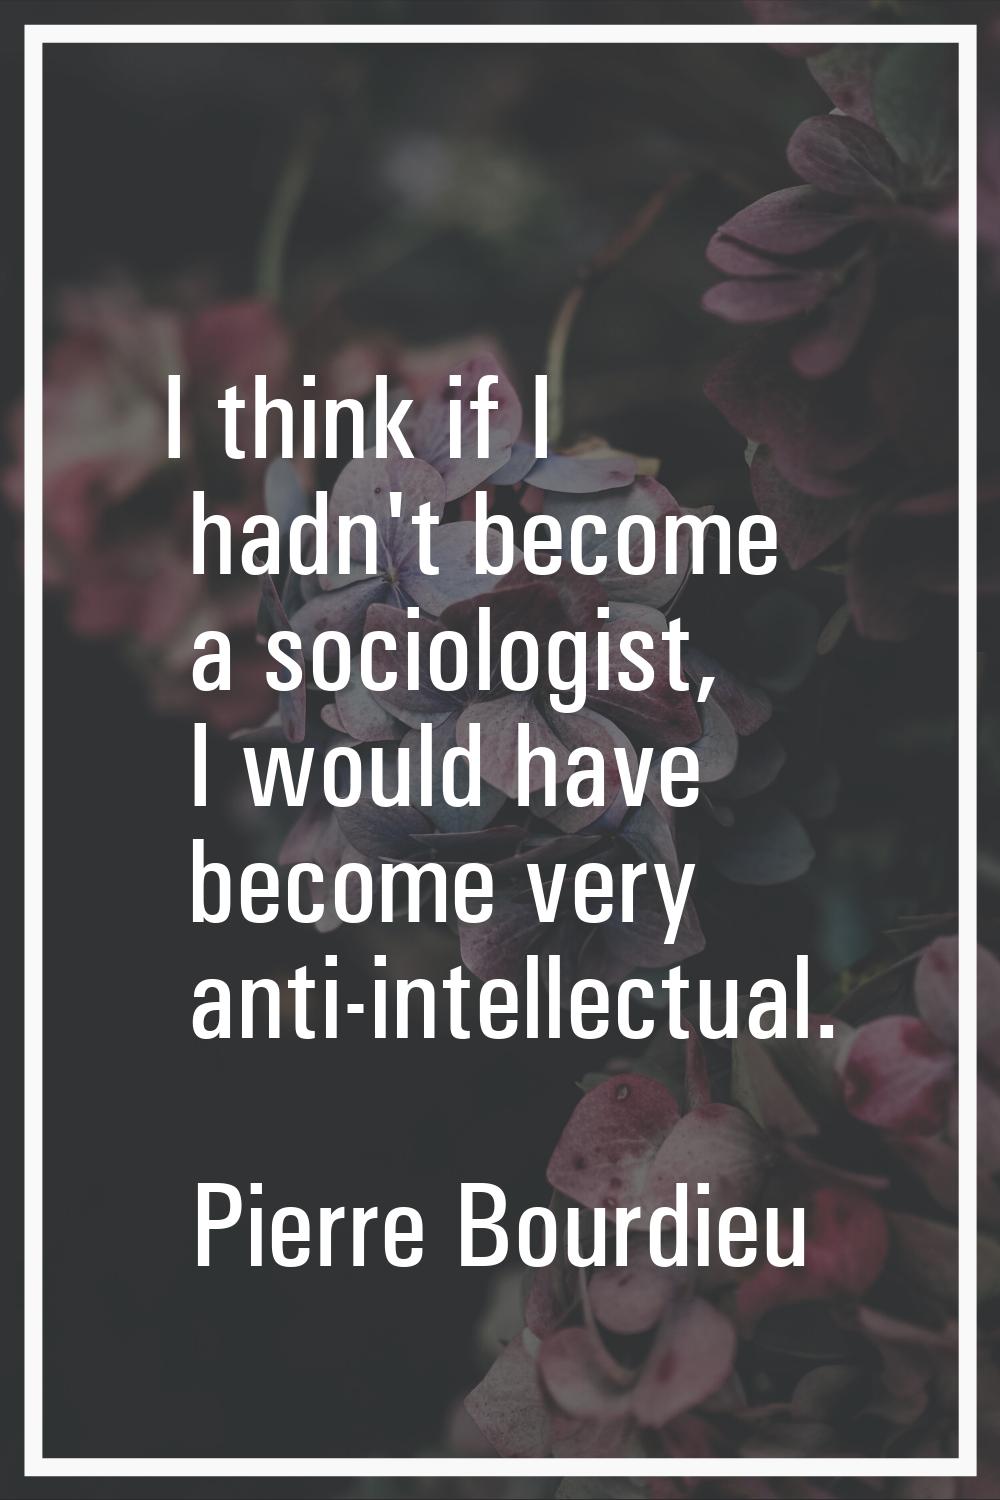 I think if I hadn't become a sociologist, I would have become very anti-intellectual.